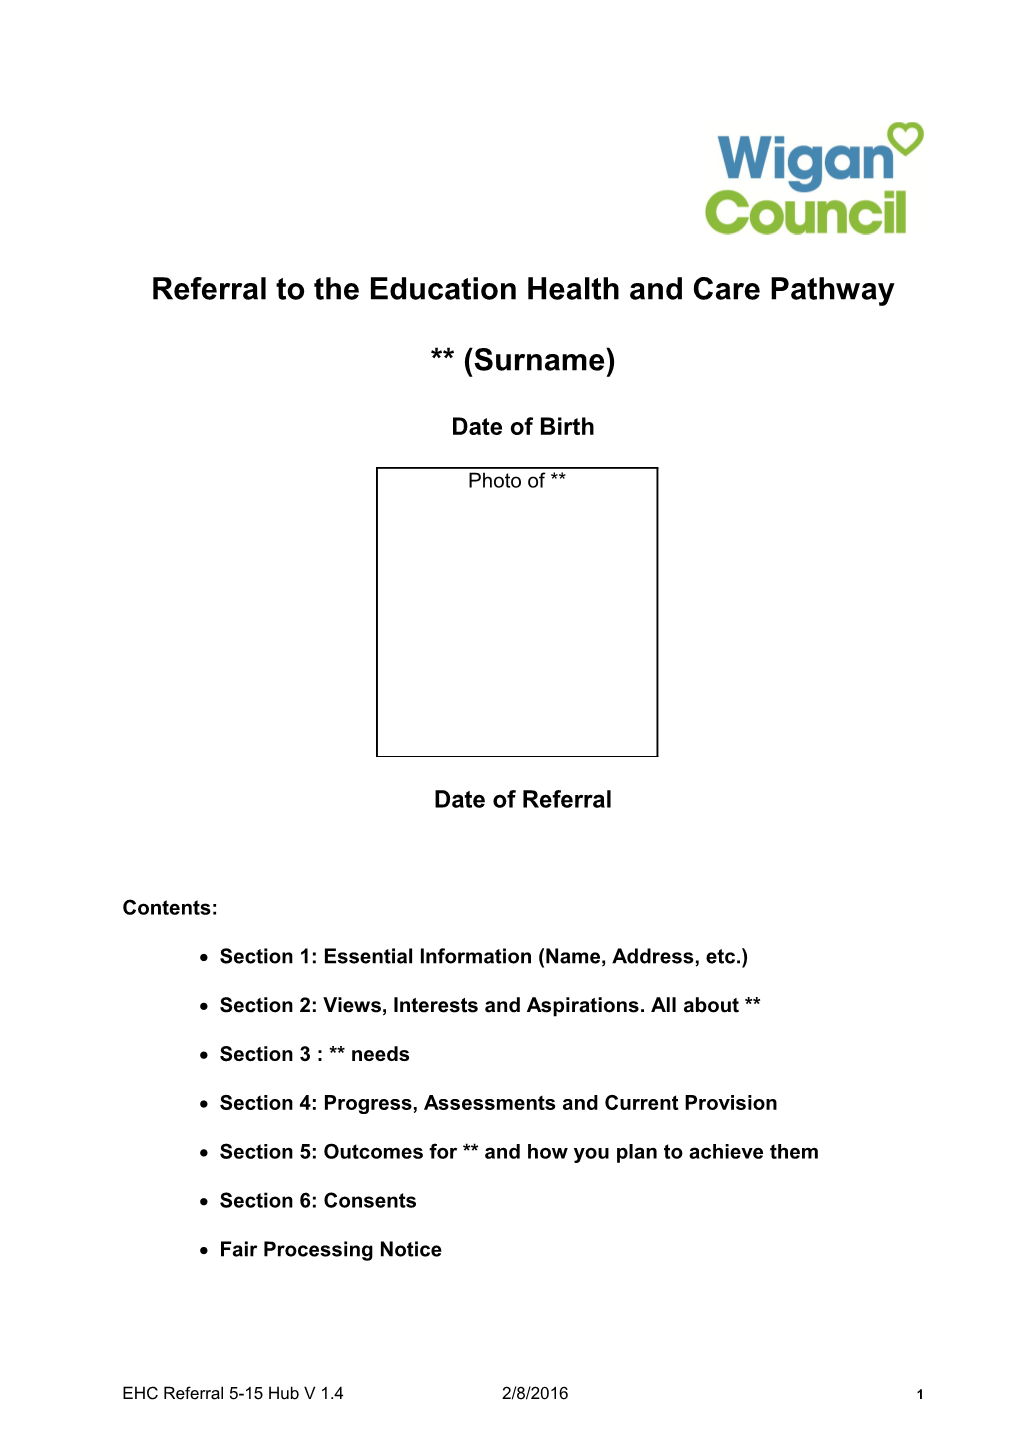 Referral to EHC Pathway